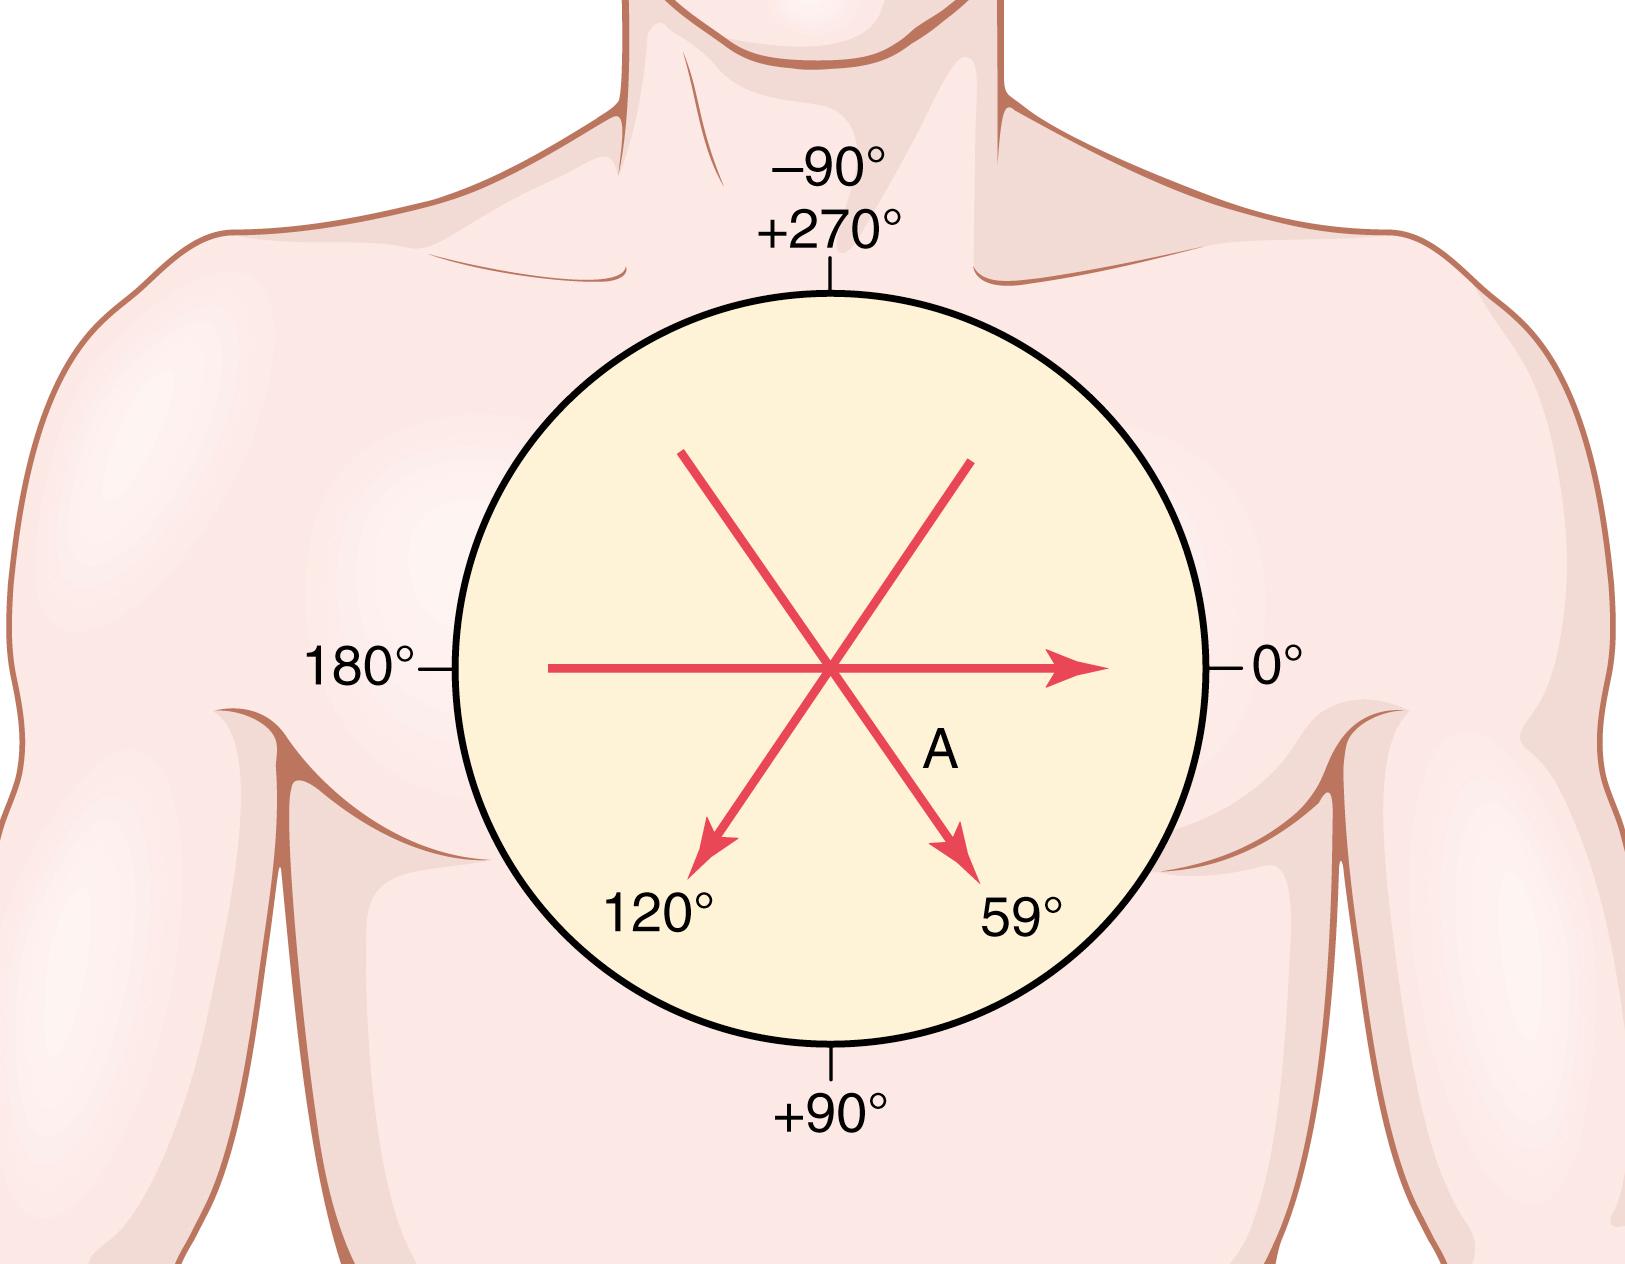 Figure 12-2, Vectors drawn to represent potentials for several different hearts and the axis of the potential (expressed in degrees) for each heart.